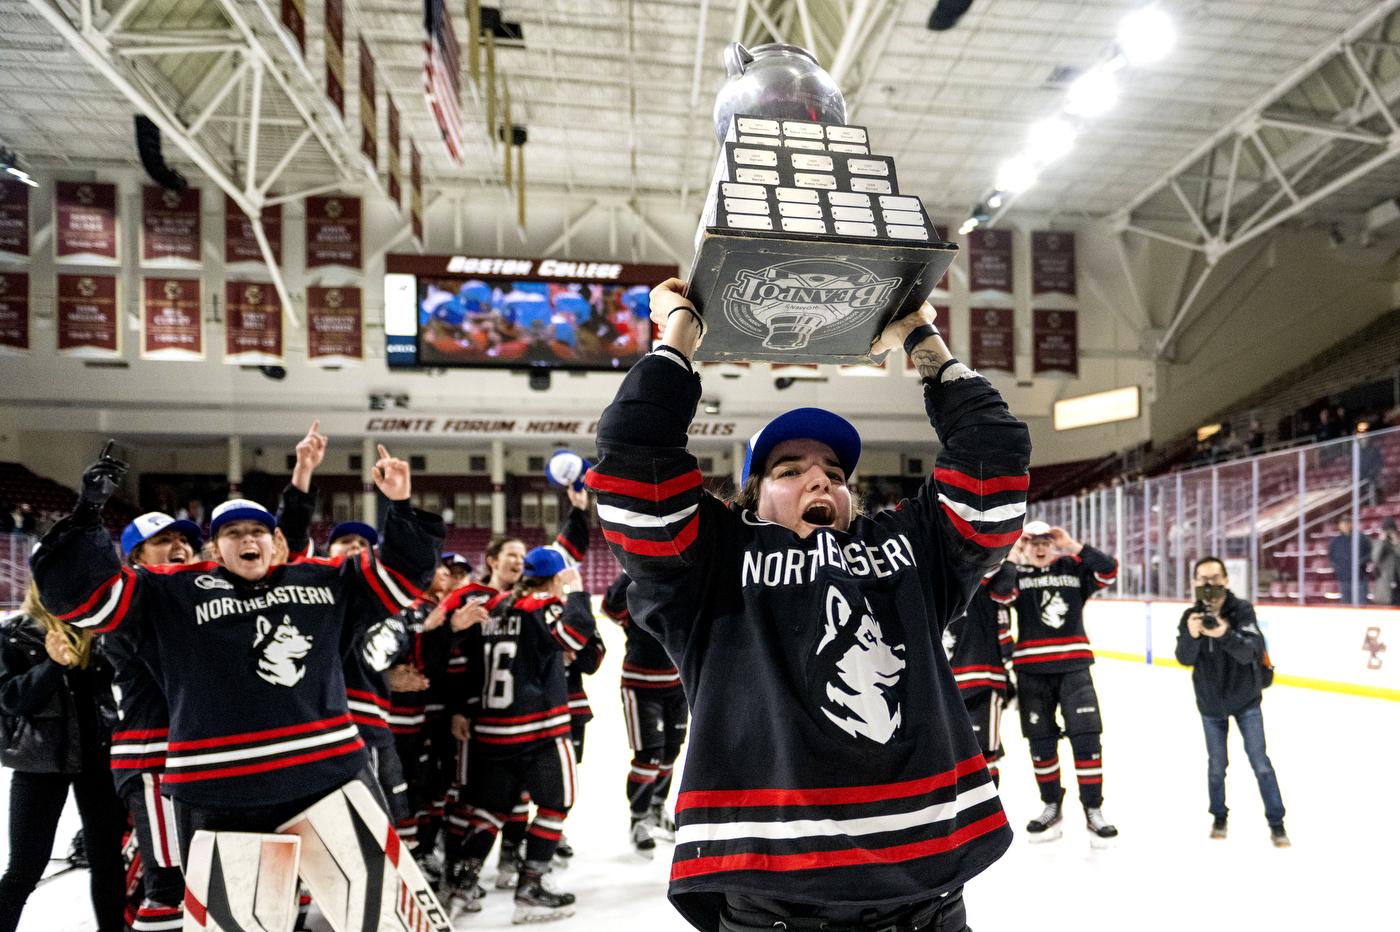 A Northeastern women's hockey player hoists the Beanpot tropy over her head and smiles as her teammates look on and cheer.